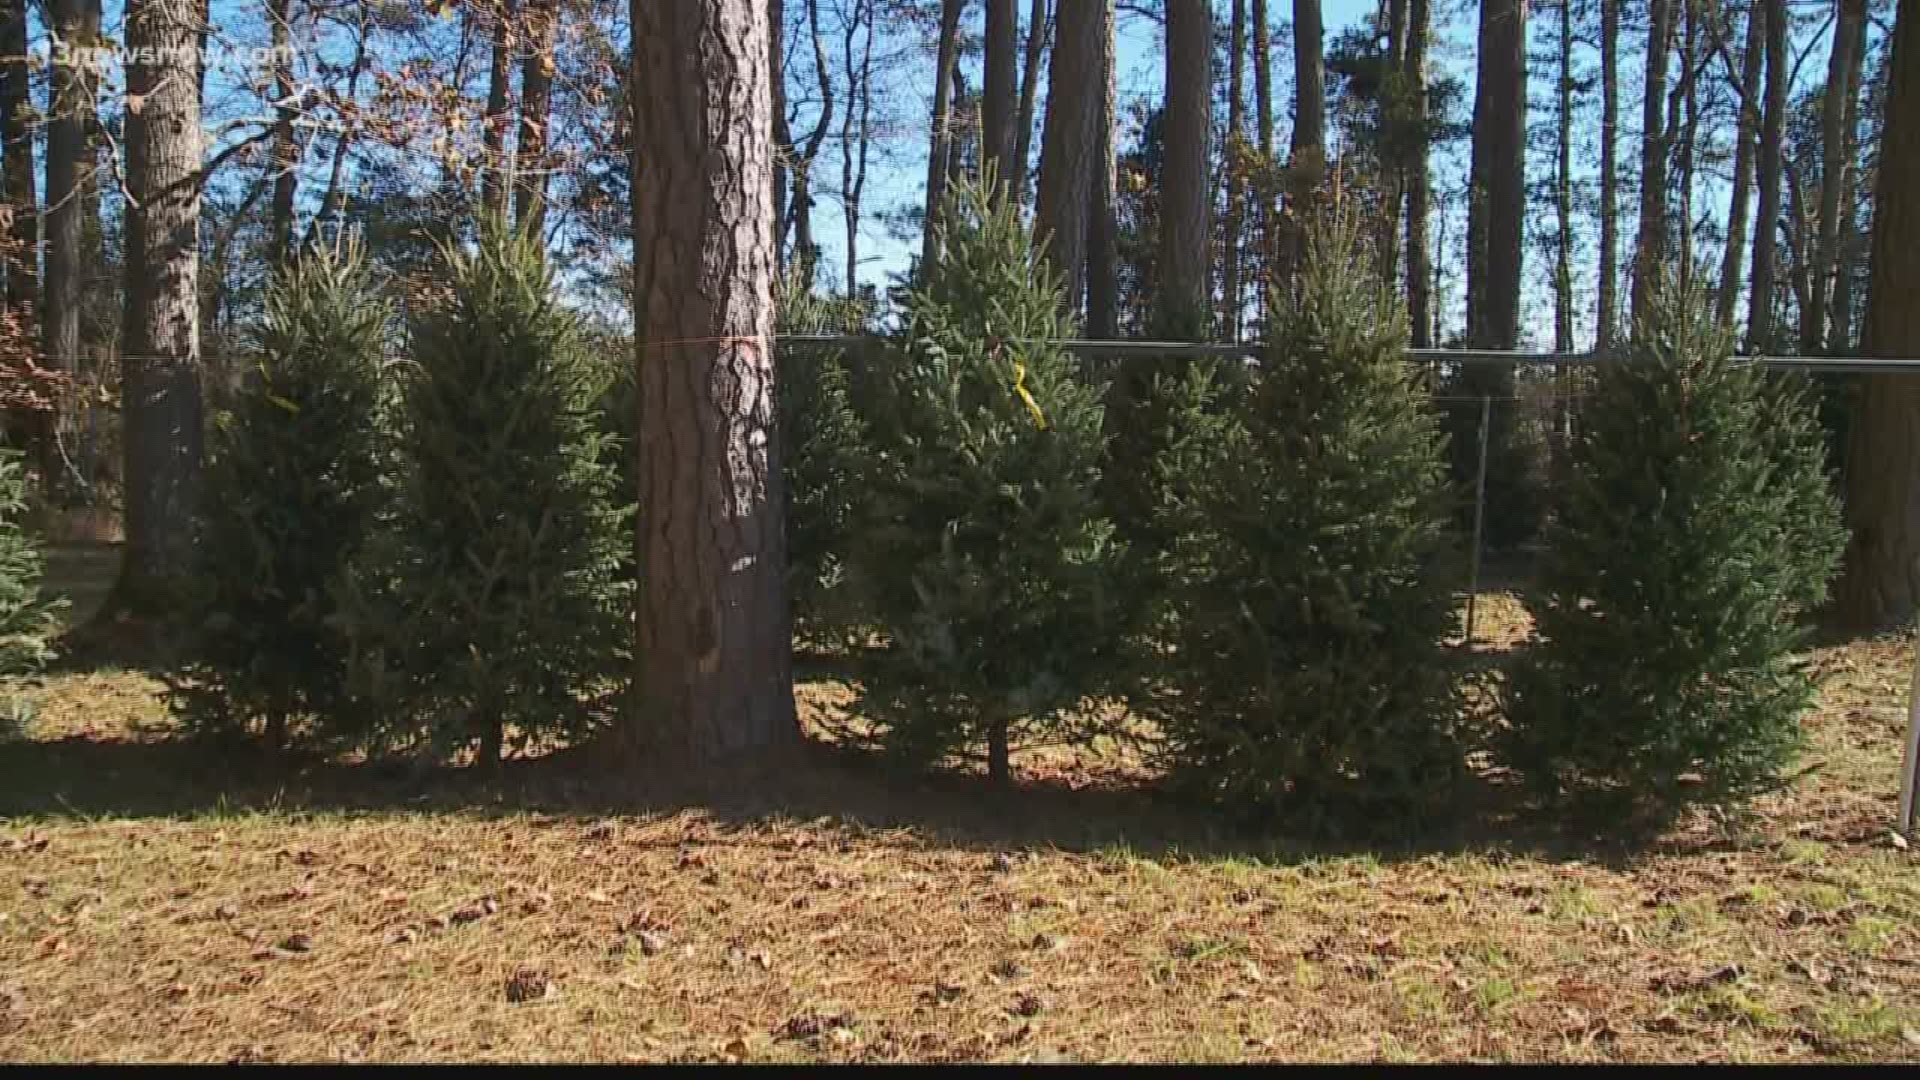 Jeff Henley and his family run the Virginia Beach operation year-round. This time of year, they have Christmas trees and other holiday fare for sale.